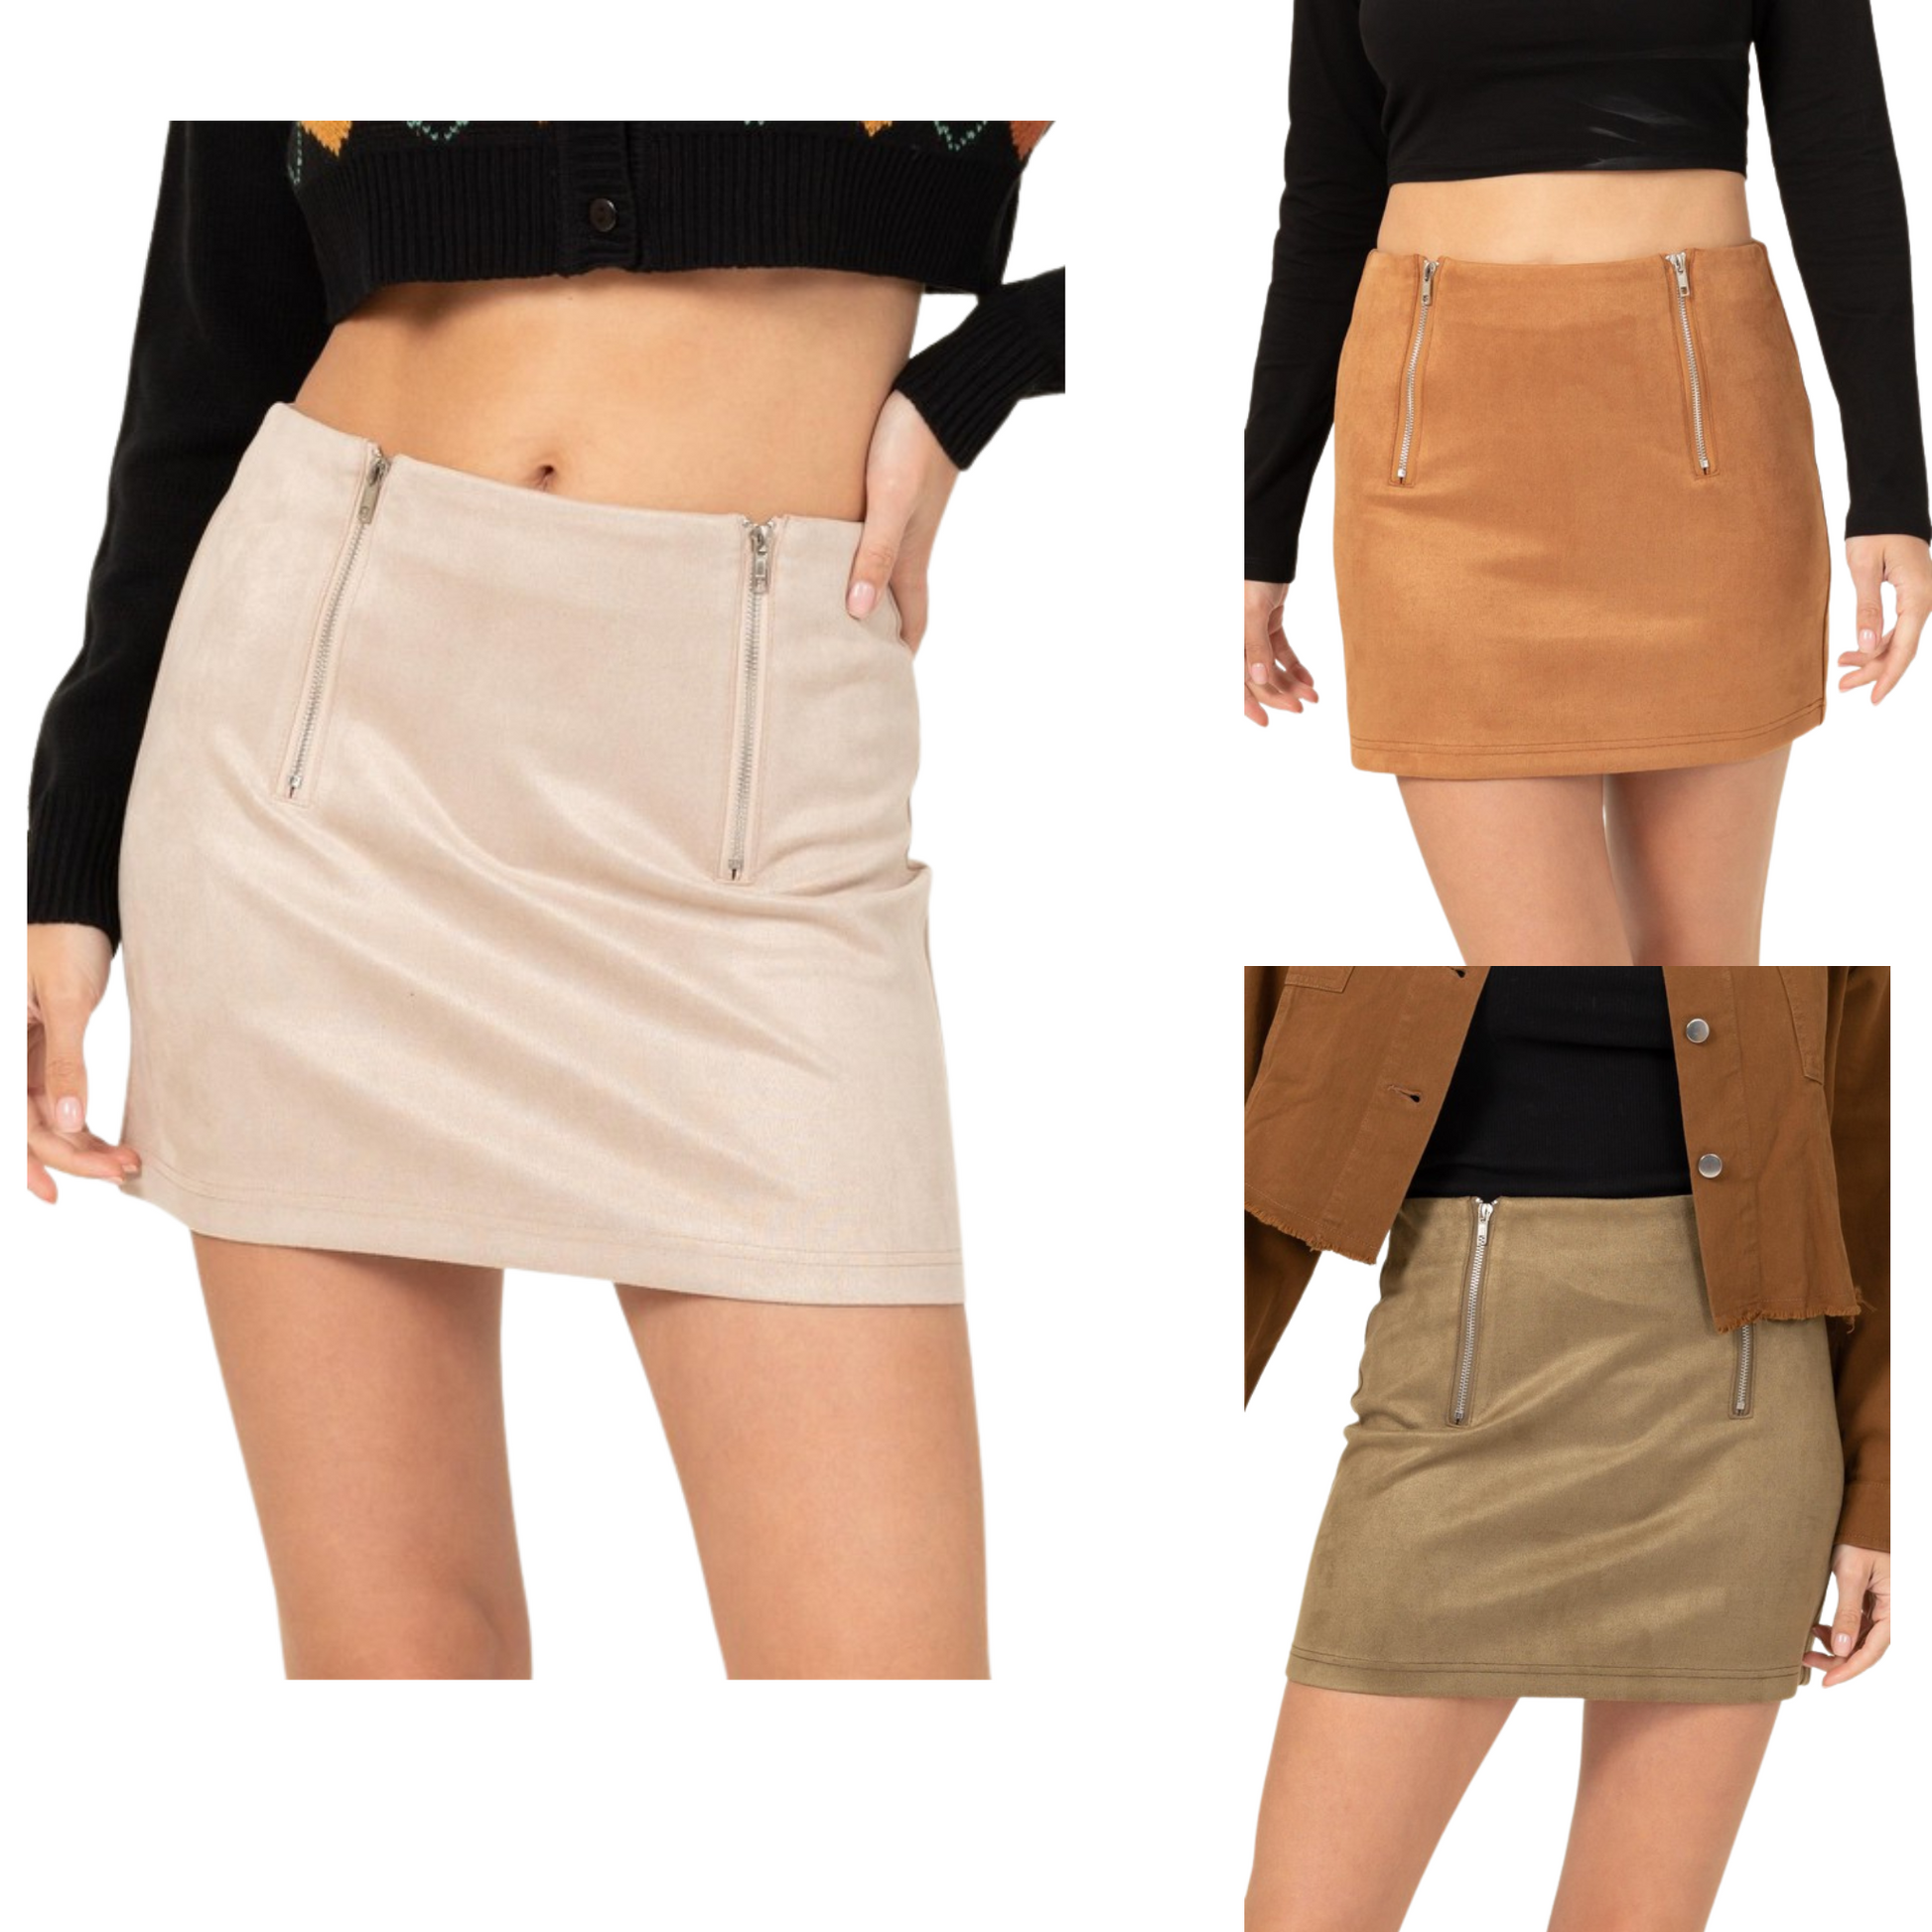 Our Bodycon Mini Skirt is the perfect addition to your wardrobe. Featuring a double zipper to add an edgy style, this skirt is a show-stopper. Available in camel, light taupe, and olive, you're sure to find the perfect color to complement your outfit.